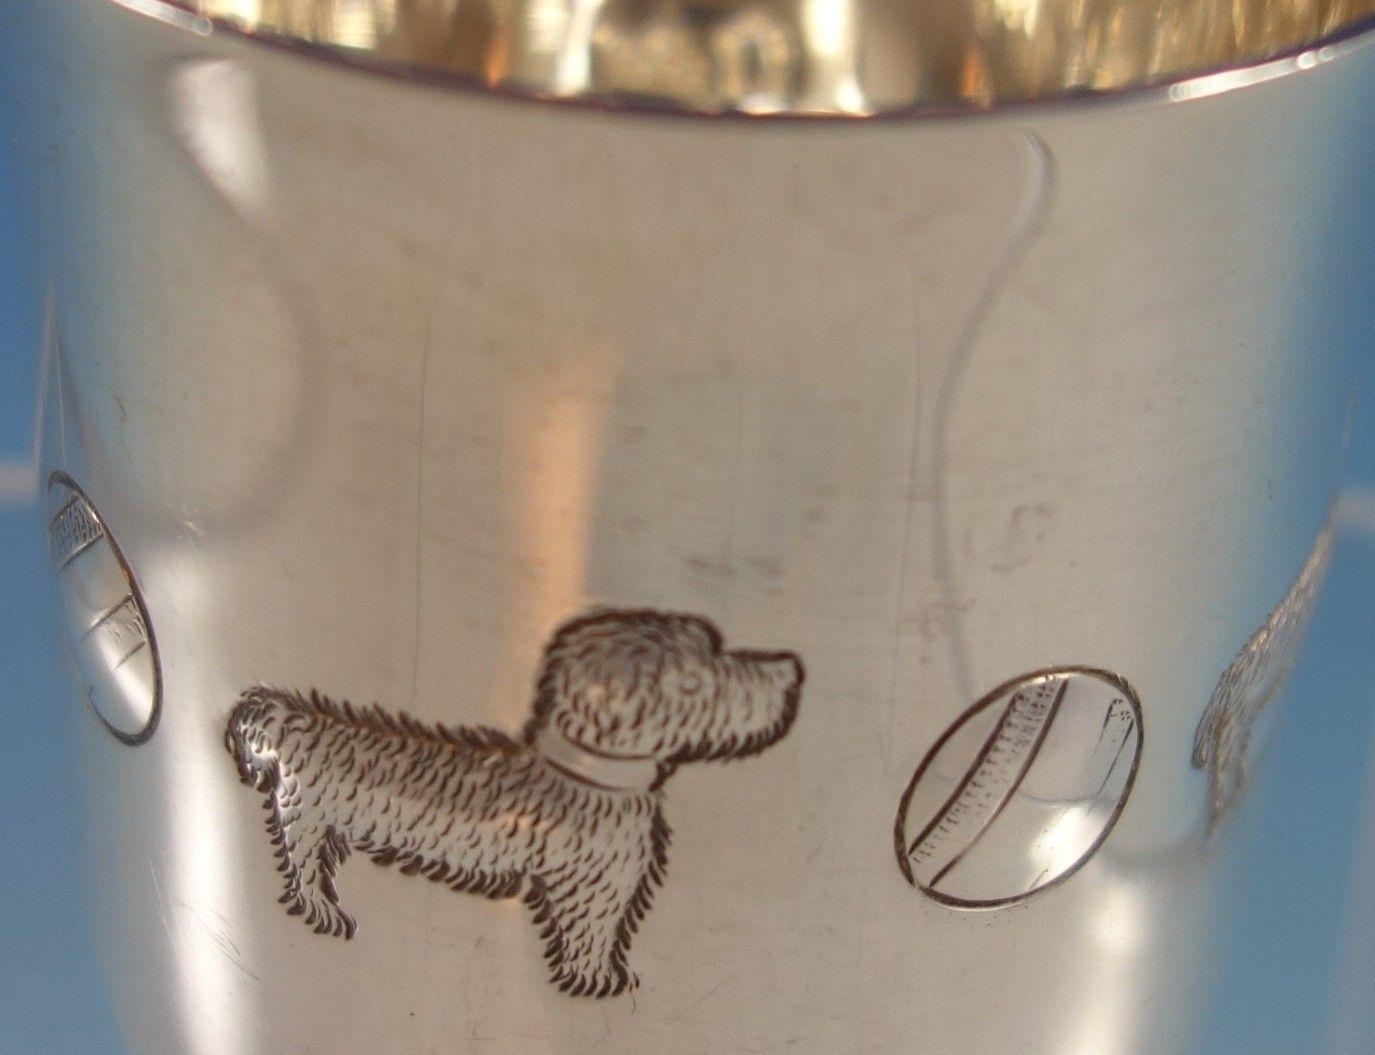 This adorable sterling baby cup was made by Tiffany & Co. It is hand chased featuring dogs and balls. The measurements for the cup are 2 1/4